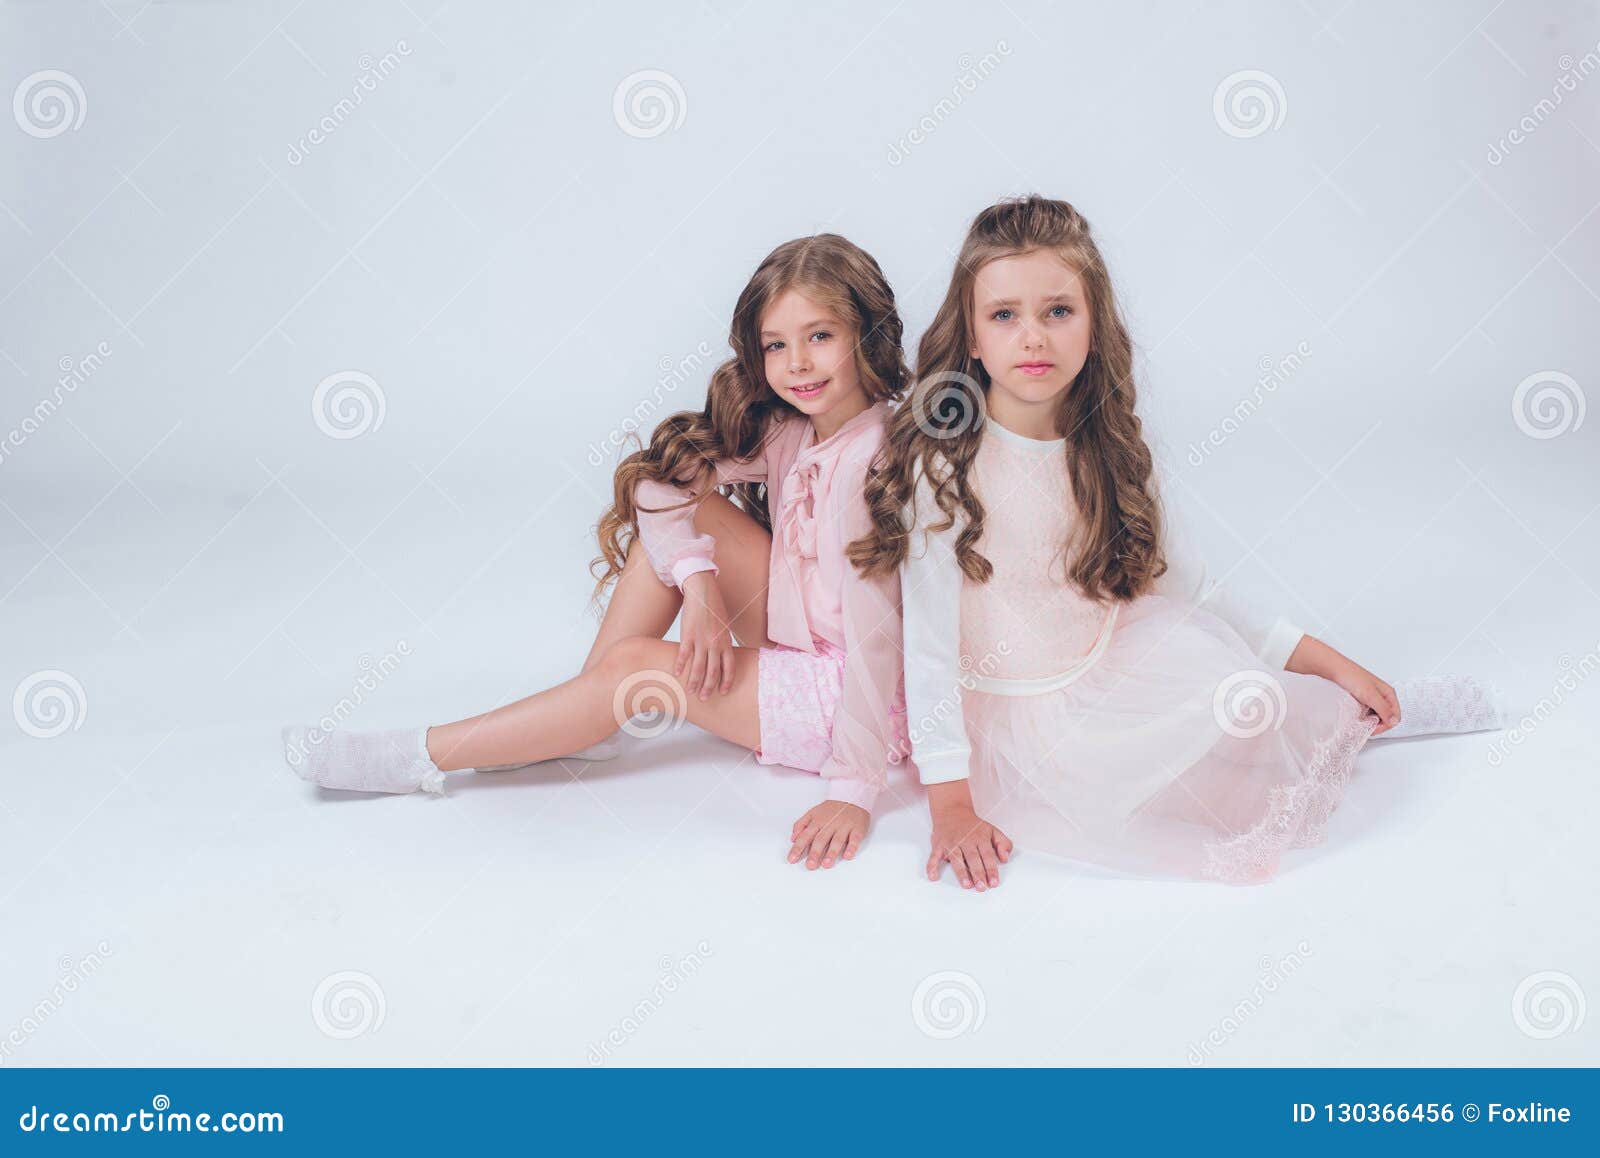 Cute Little Girls With Curly Hair In Fashionable Clothes Of